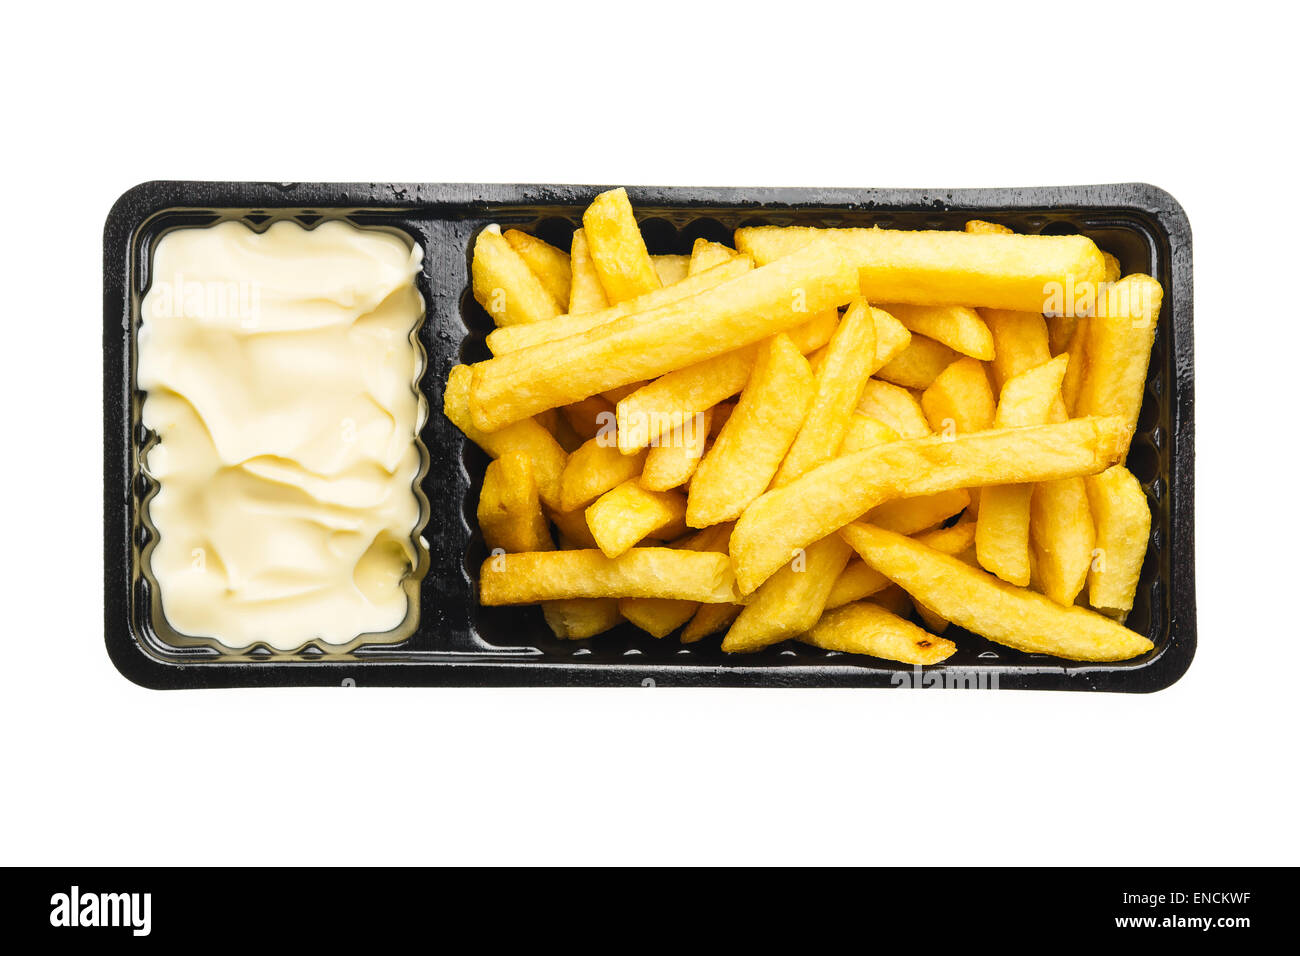 French fries with mayonnaise, fried potatoes typical fast food in The Netherlands and Belgium. Also called patat met. Stock Photo